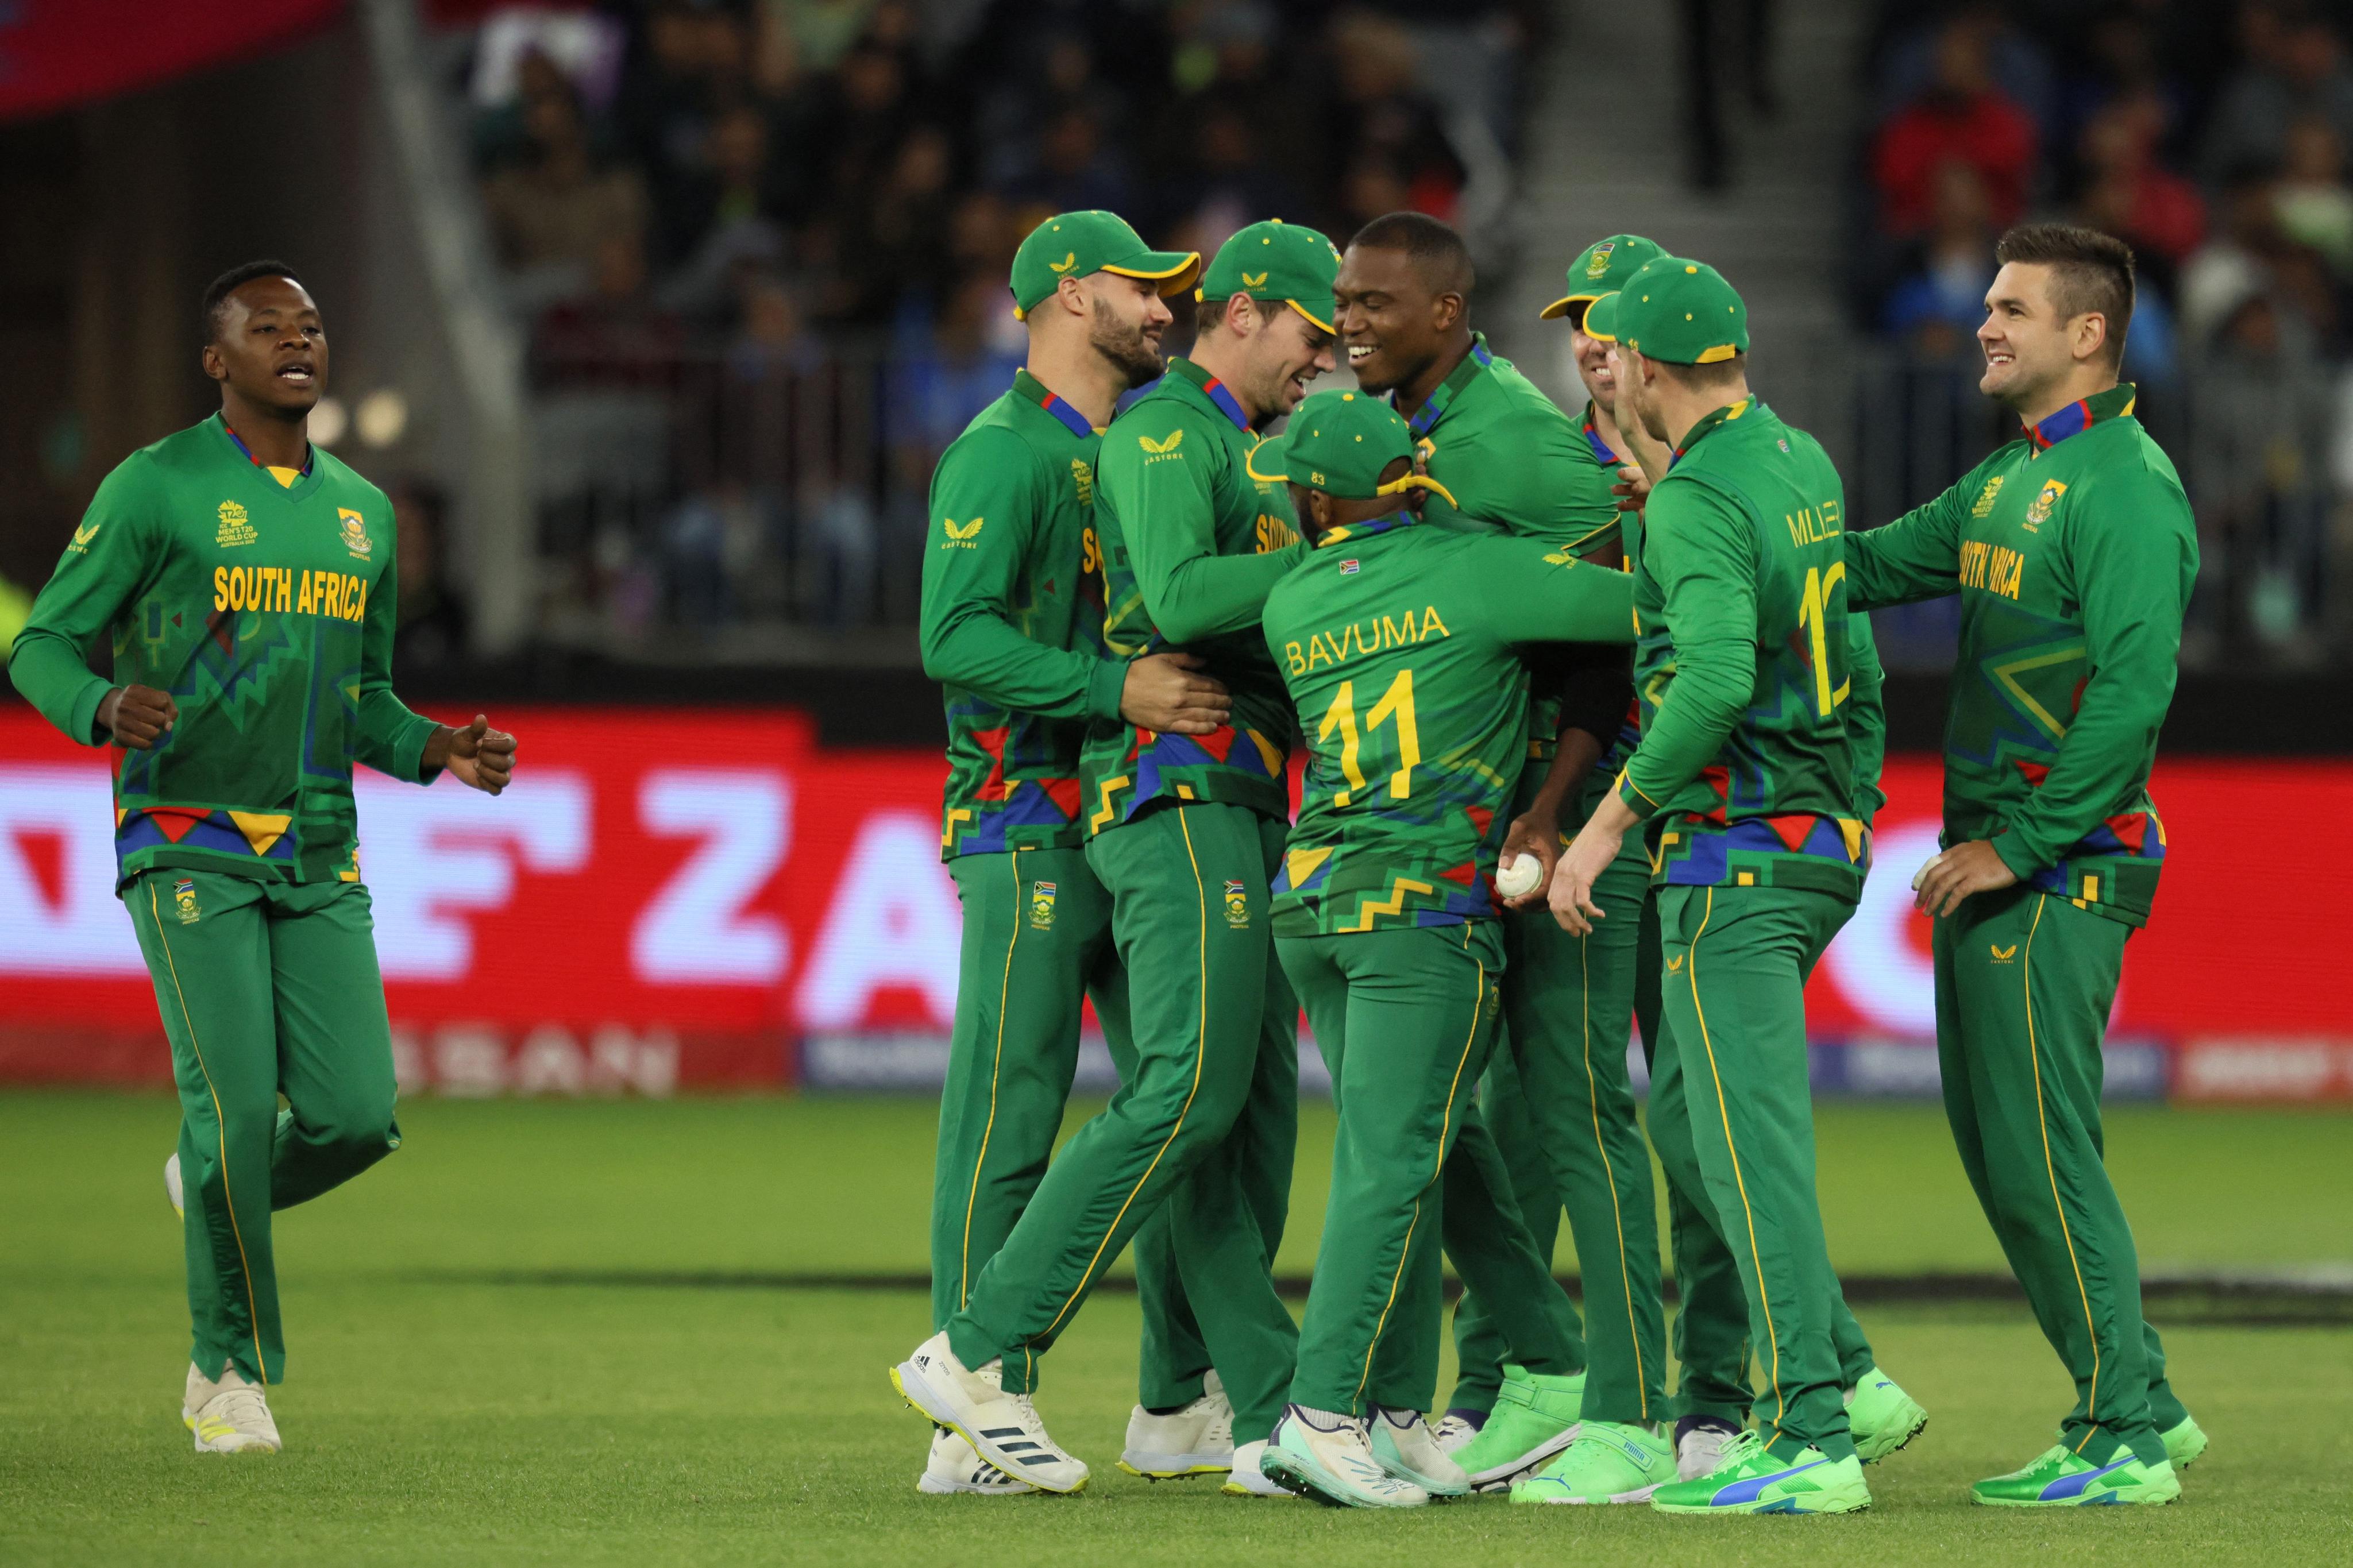 ICC World T20 | Twitter reacts as South Africa beats India by five wickets in a close contest